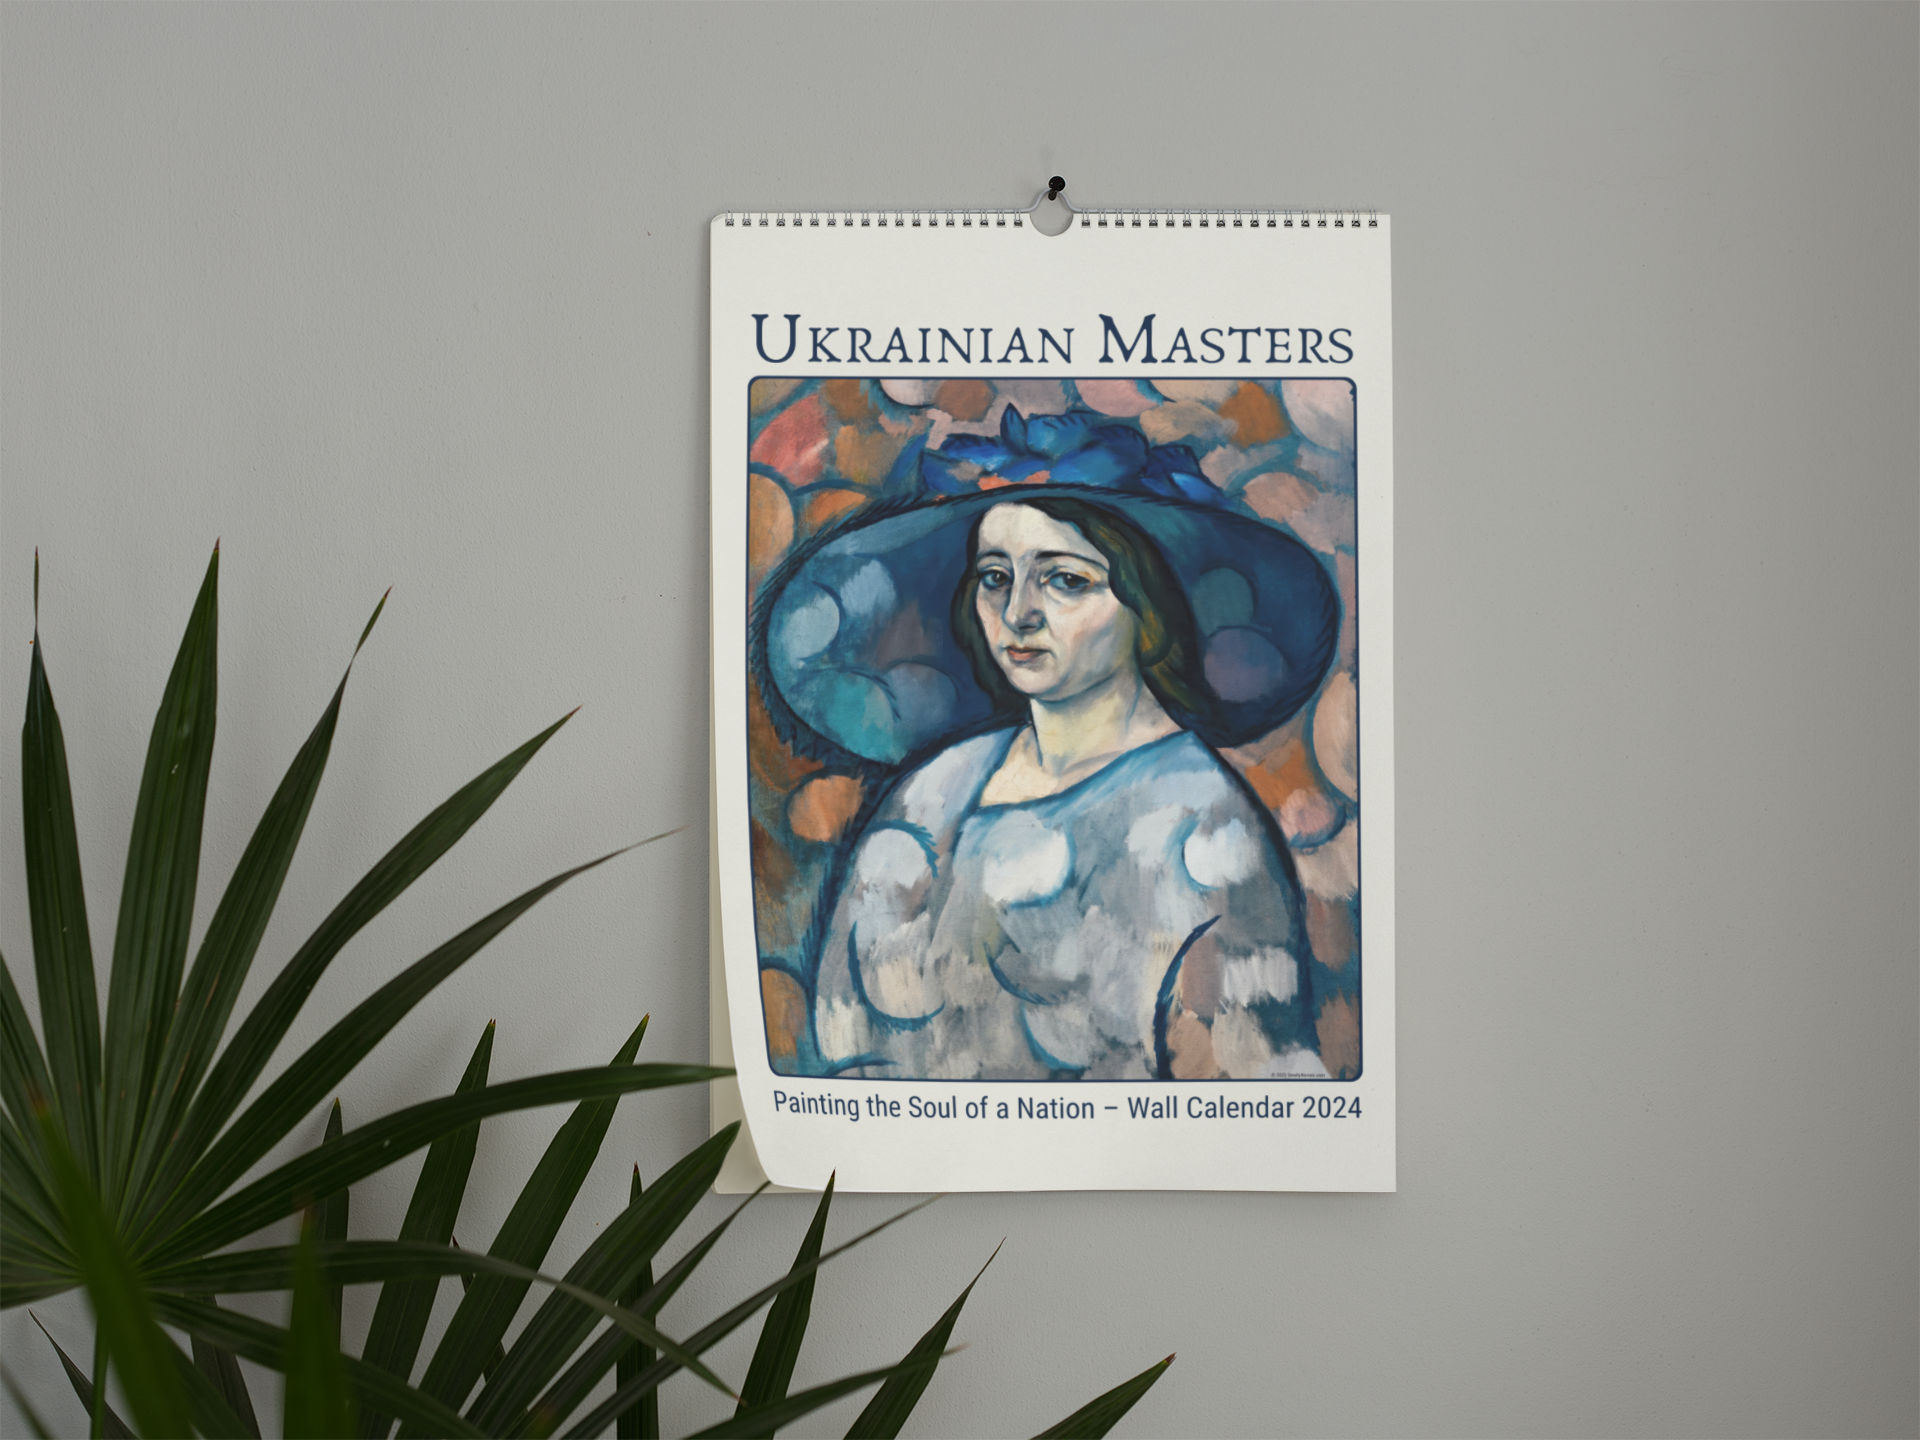 2024 Ukrainian Fine Art Wall Calendar - Cultural Journey with Celebrated Artists, from Cubo-Futurism to Folk Art, Featuring Baranov-Rossiné, Malevich, and More, with Descriptive Insights, Ideal for Art Enthusiasts.